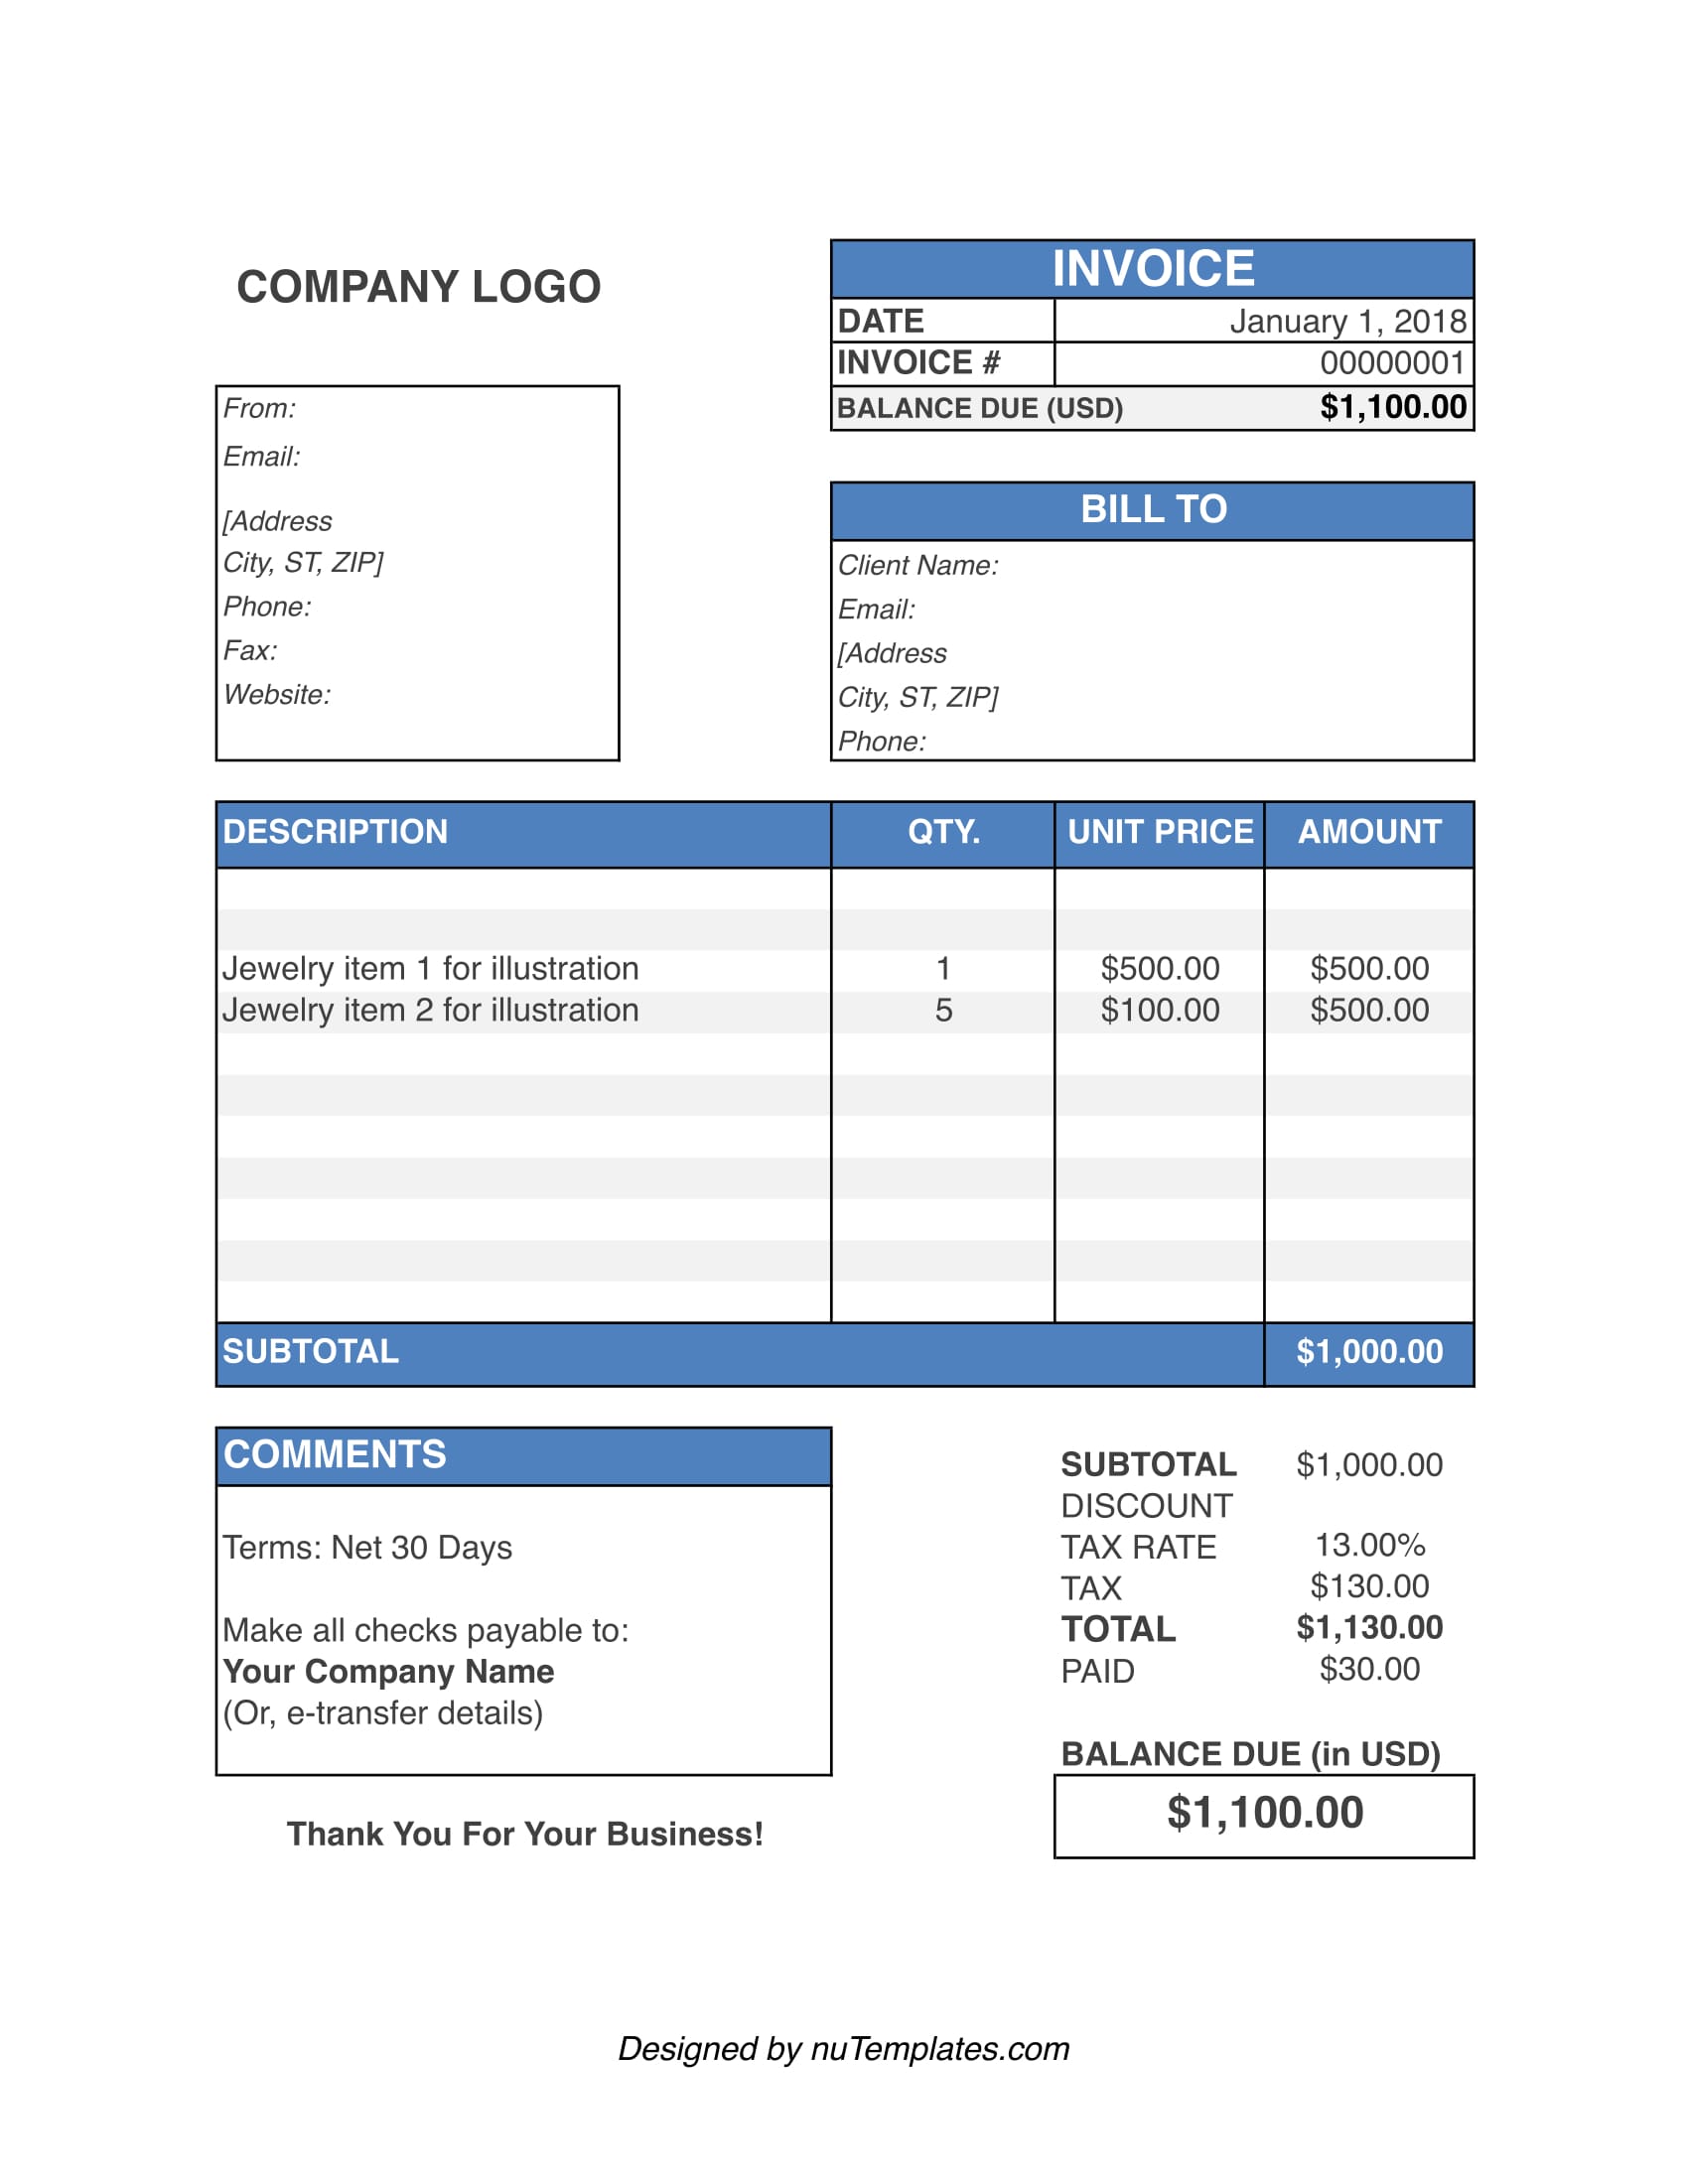 Jewelry Invoice Template Jewelry Invoices nuTemplates